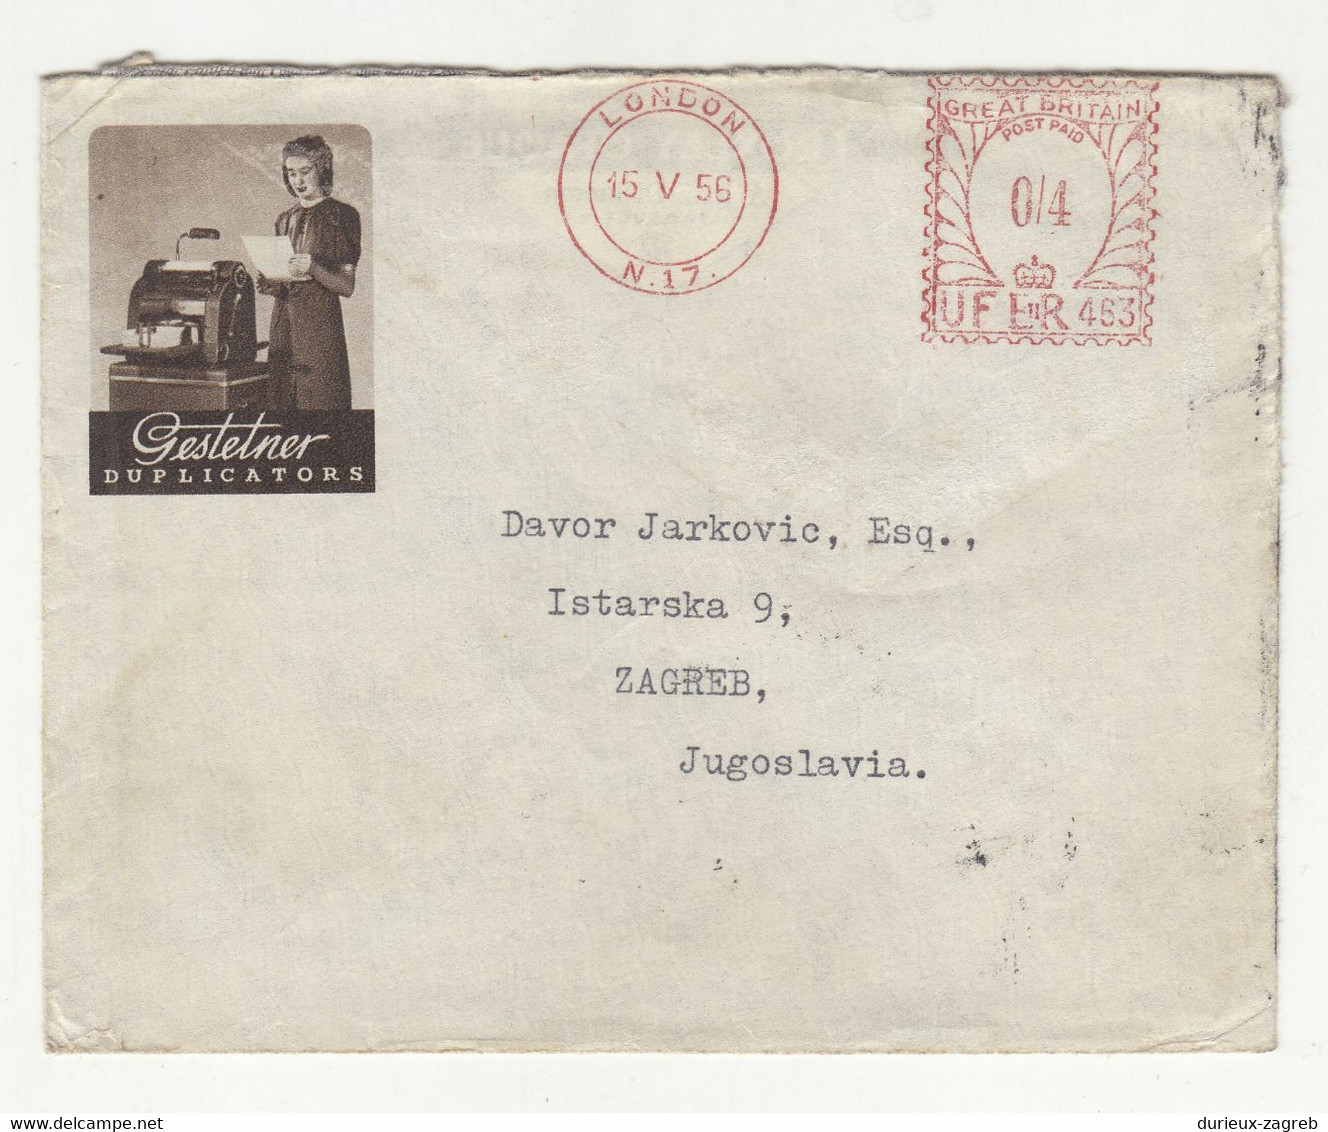 Gestetner Illustrated Company Letter Cover Posted 1956 To Zagreb - Meter Stamp B211015 - Cartas